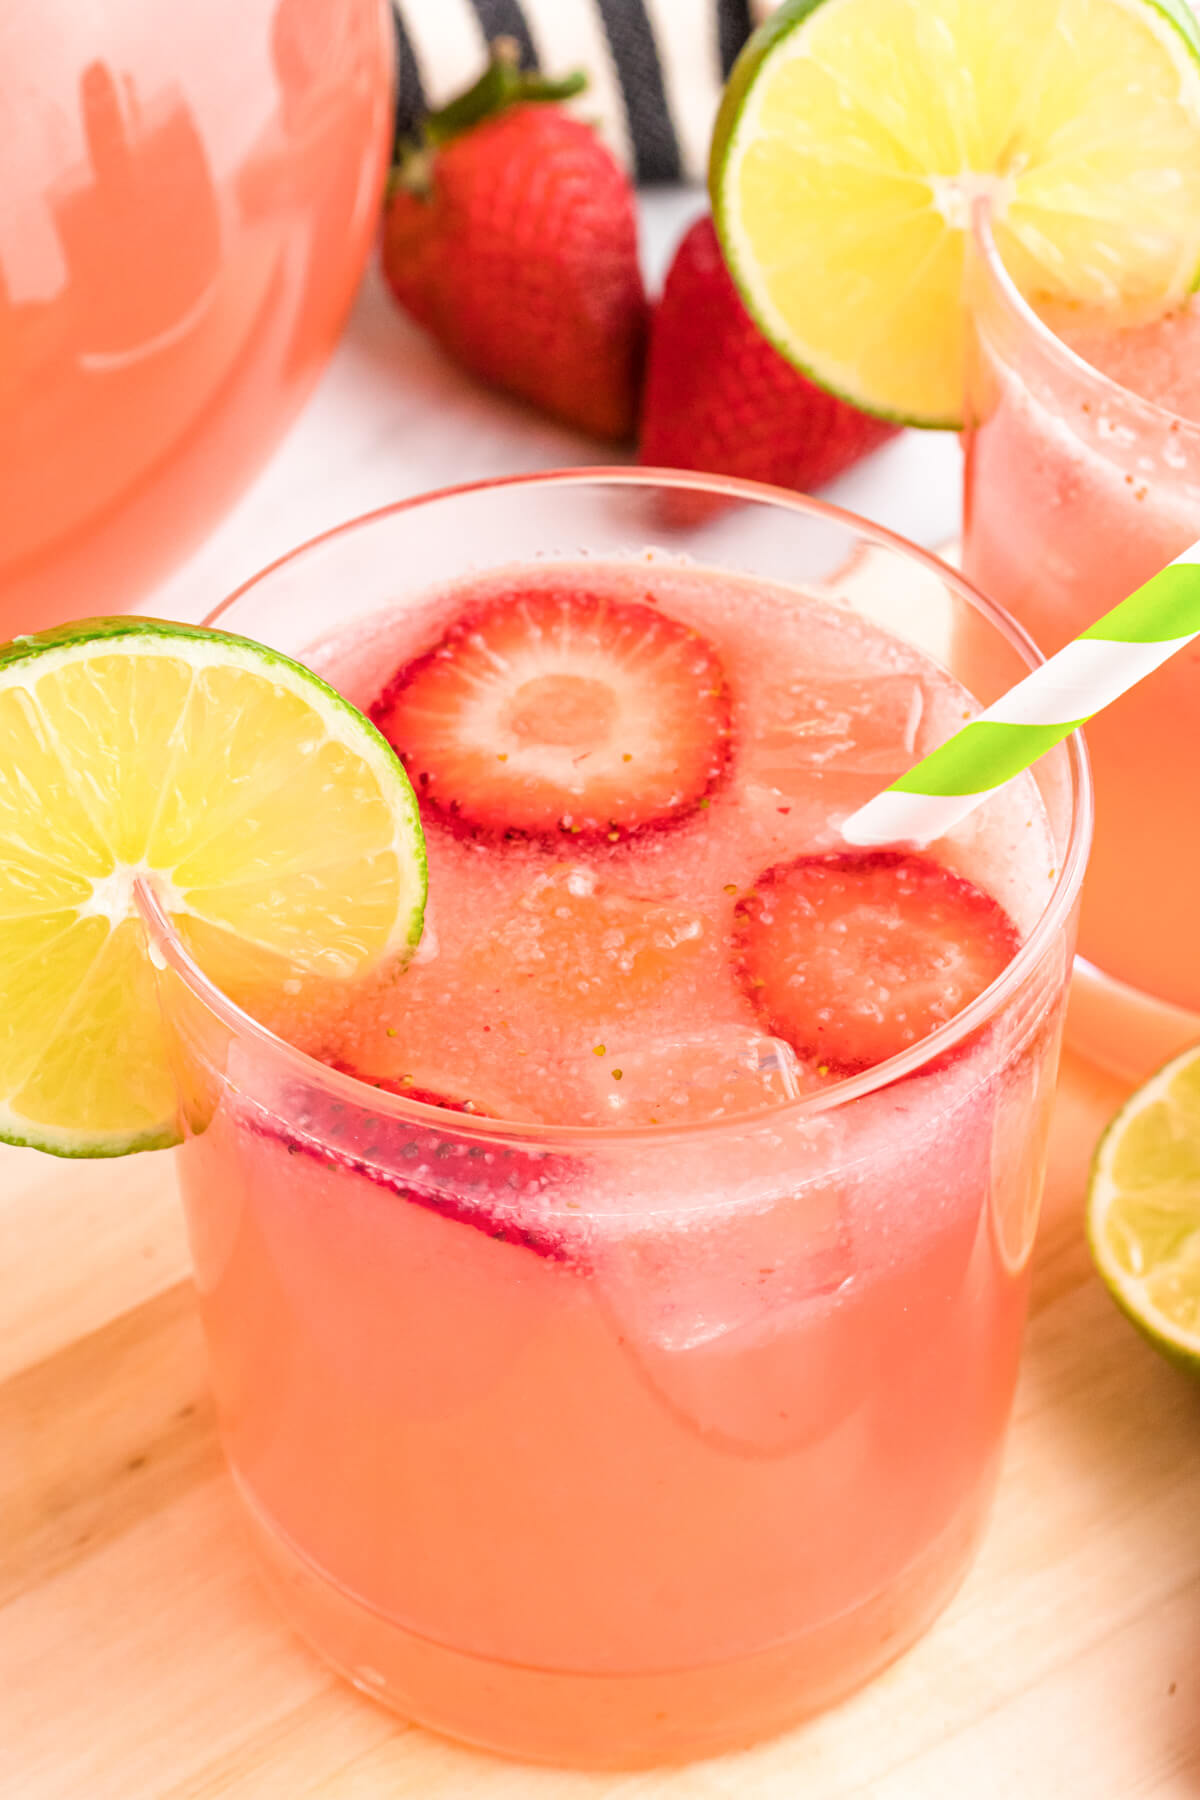 A glass pitcher and glass full of pink Strawberry Limeade garnished with sliced strawberries and lime wheels.